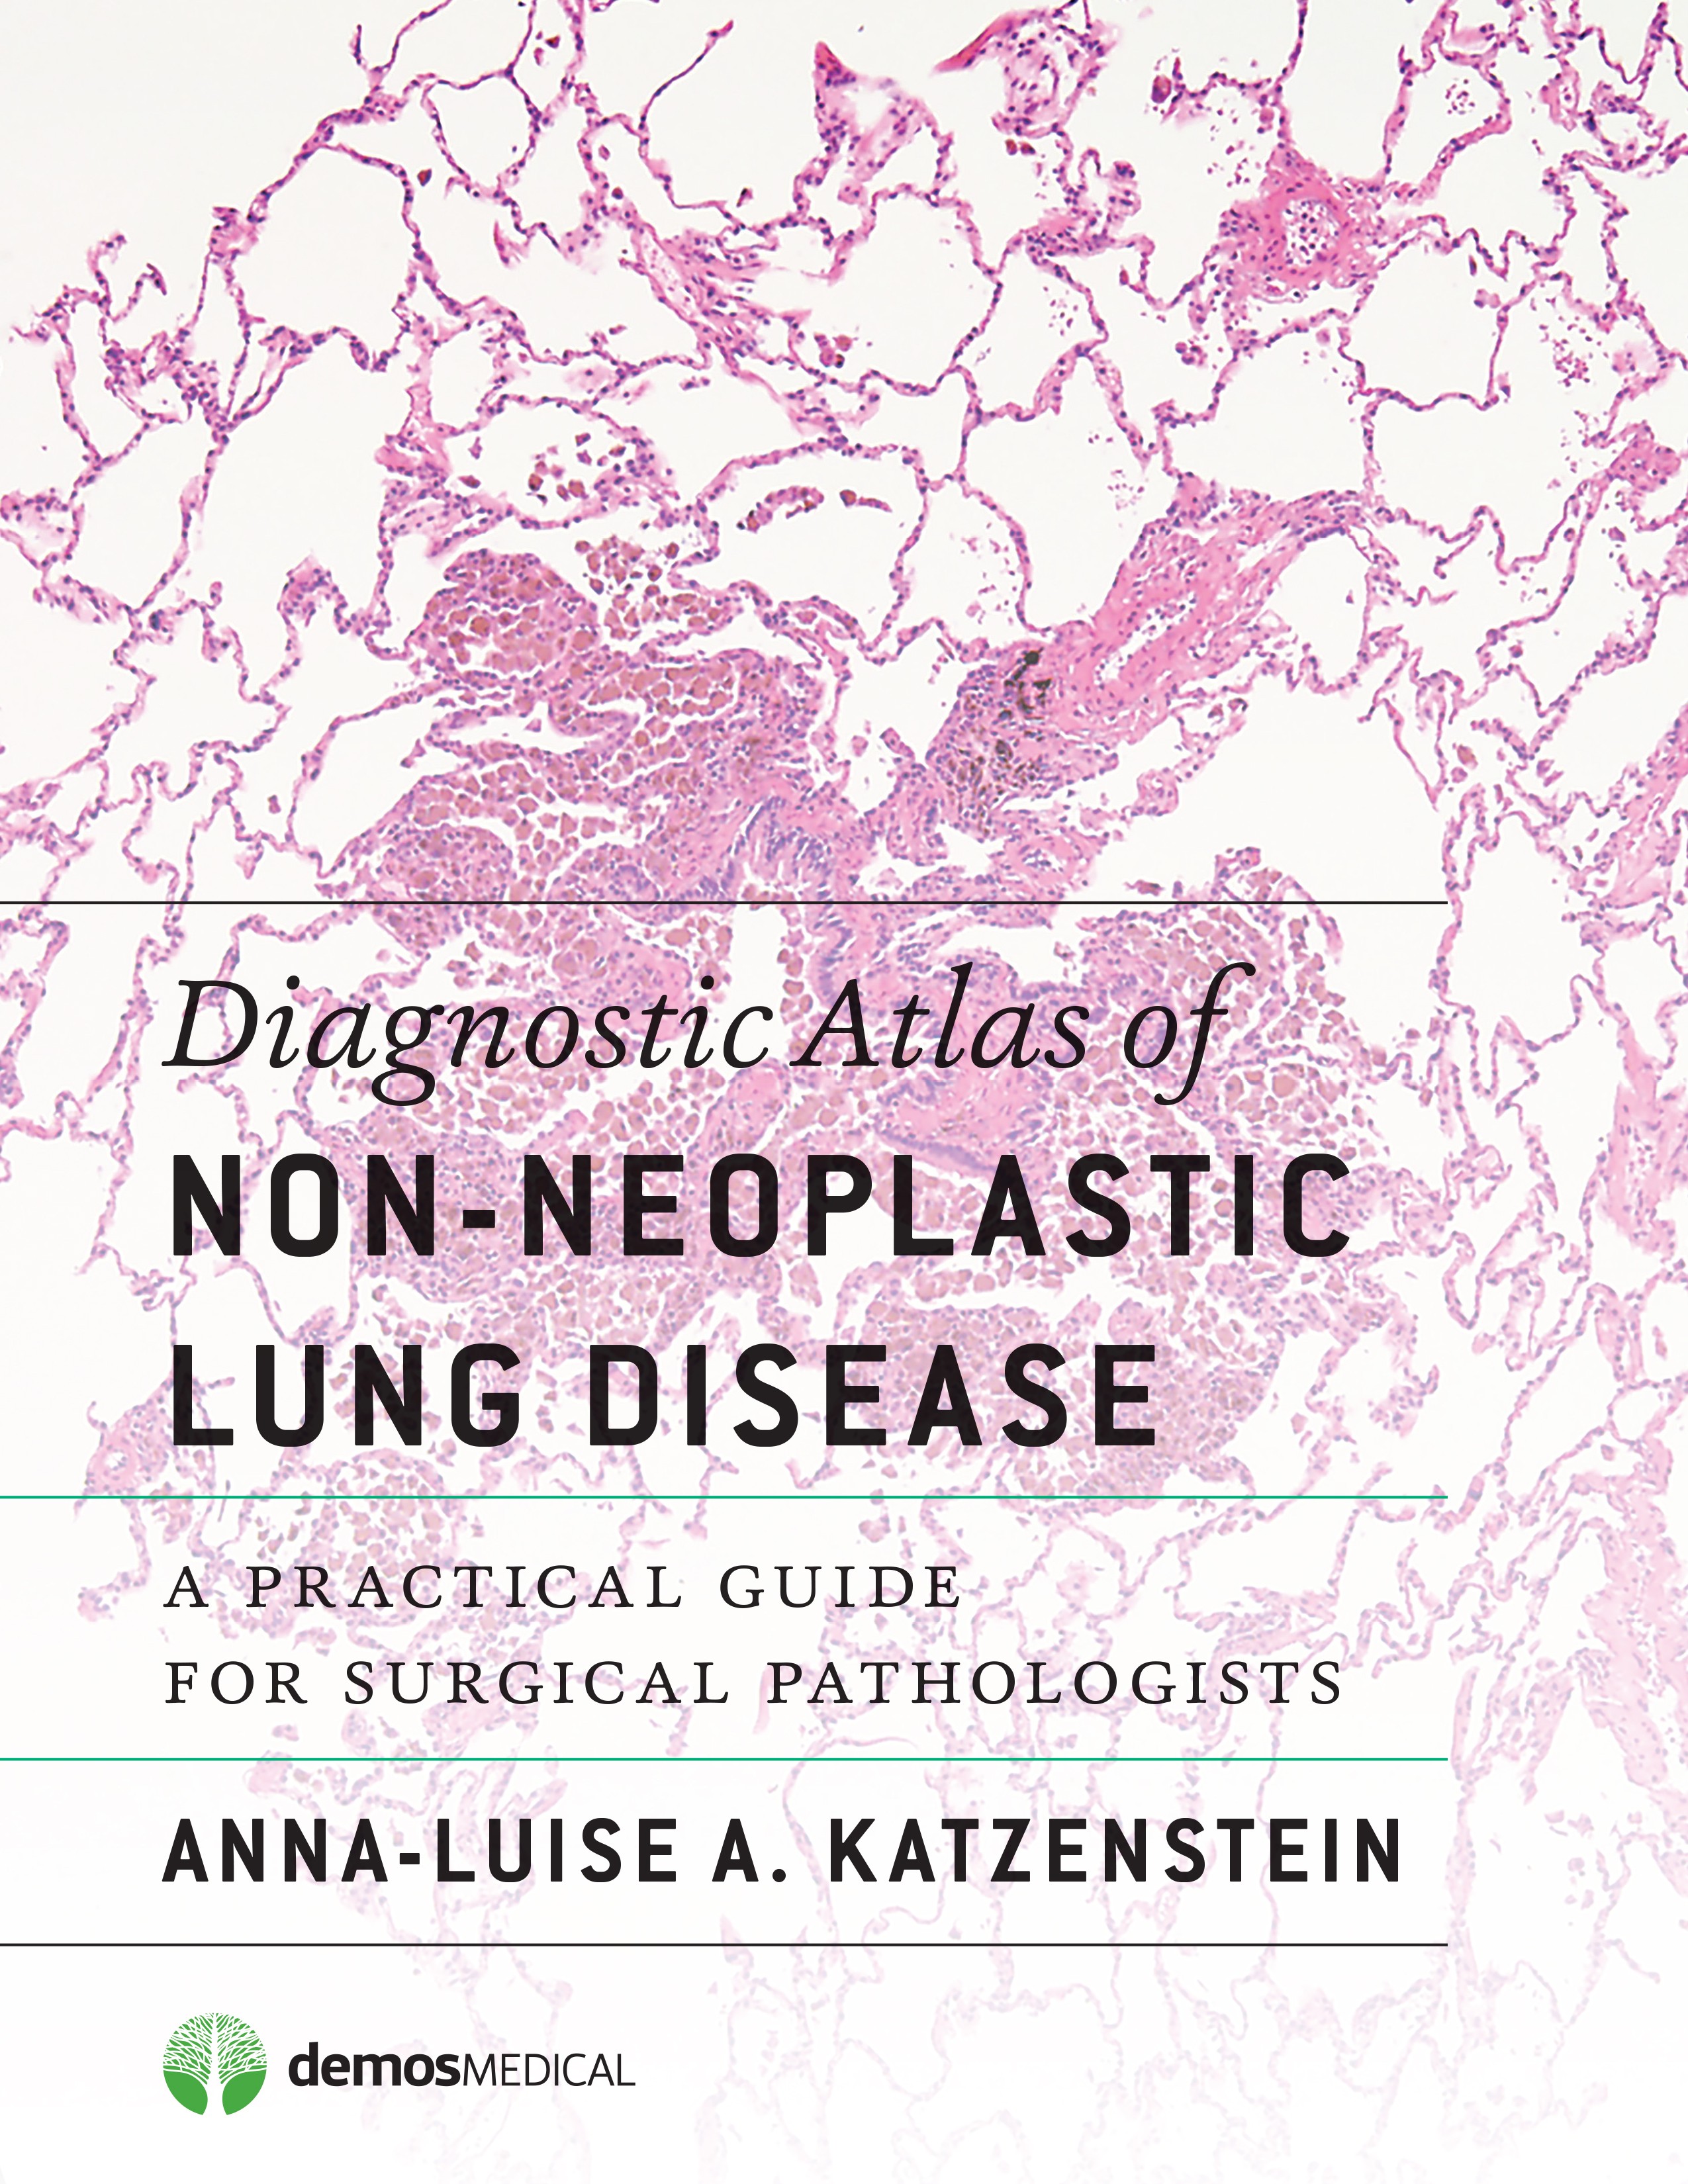 Diagnostic Atlas of Non-Neoplastic Lung Disease- A Practical Guide for Surgical Pathologists